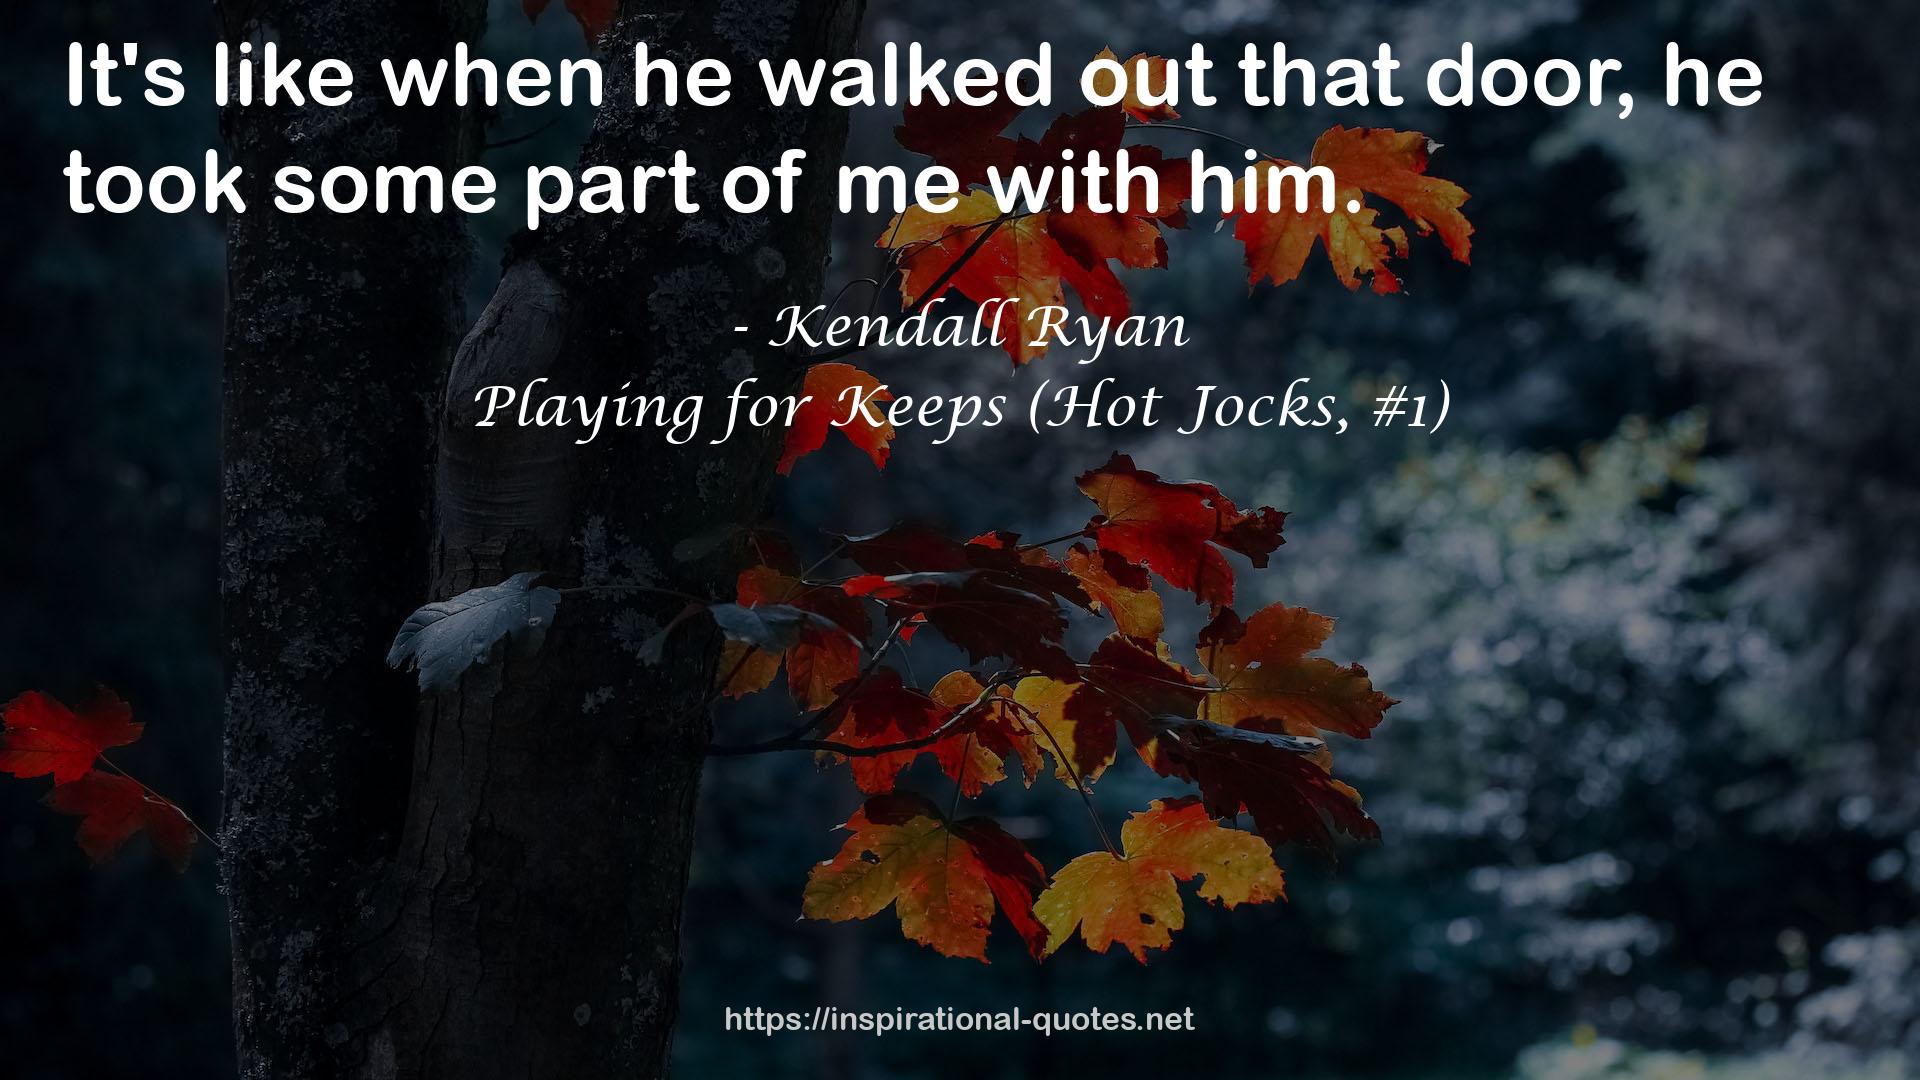 Playing for Keeps (Hot Jocks, #1) QUOTES